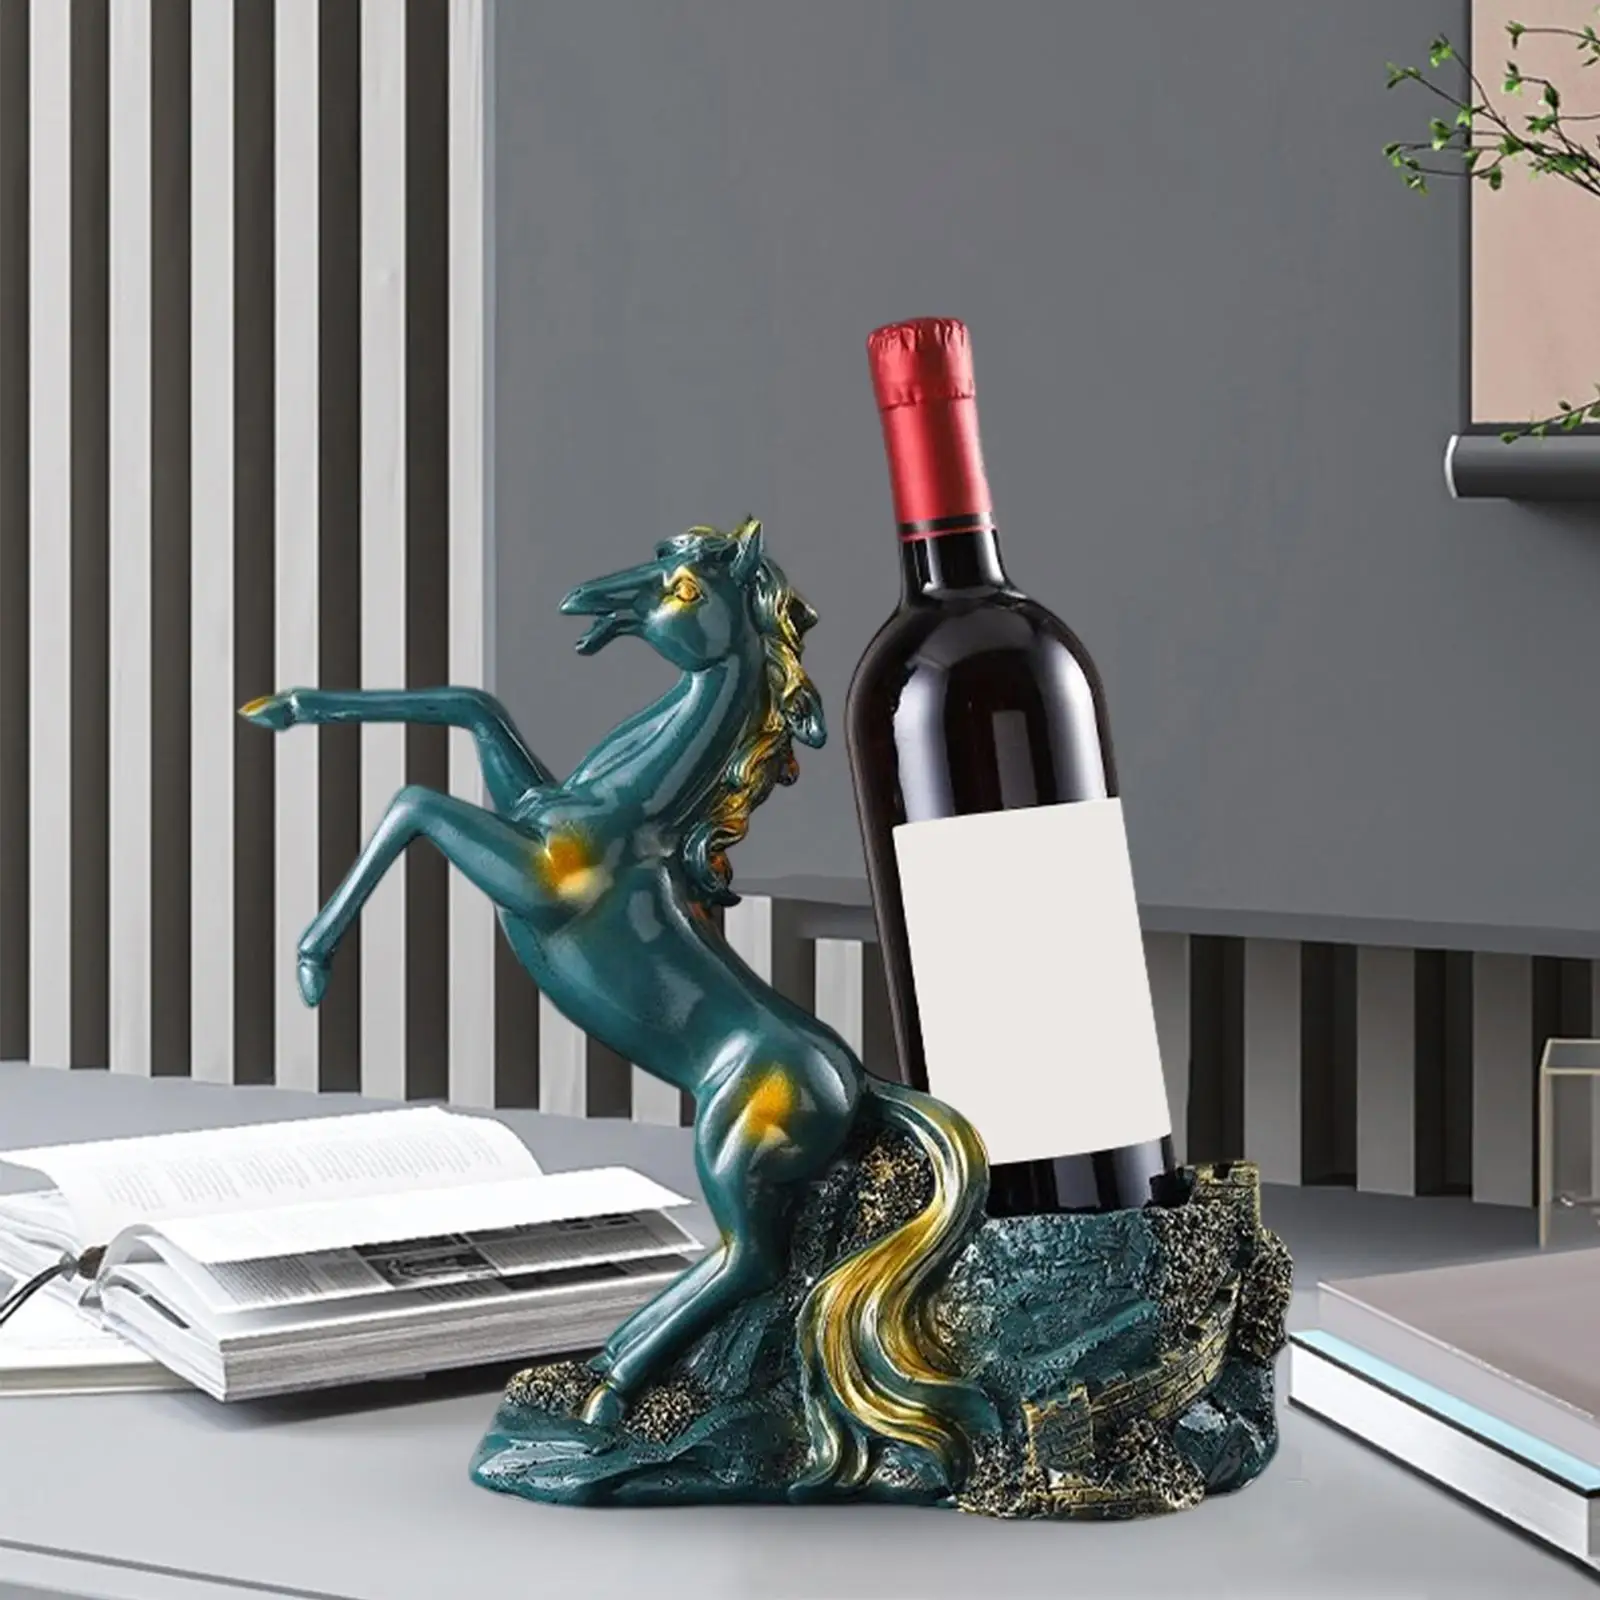 Wine Rack Horse Statues Nordic Style Wine Bottle Holder Stand Decorative Wine Display Shelf for Party Decorations